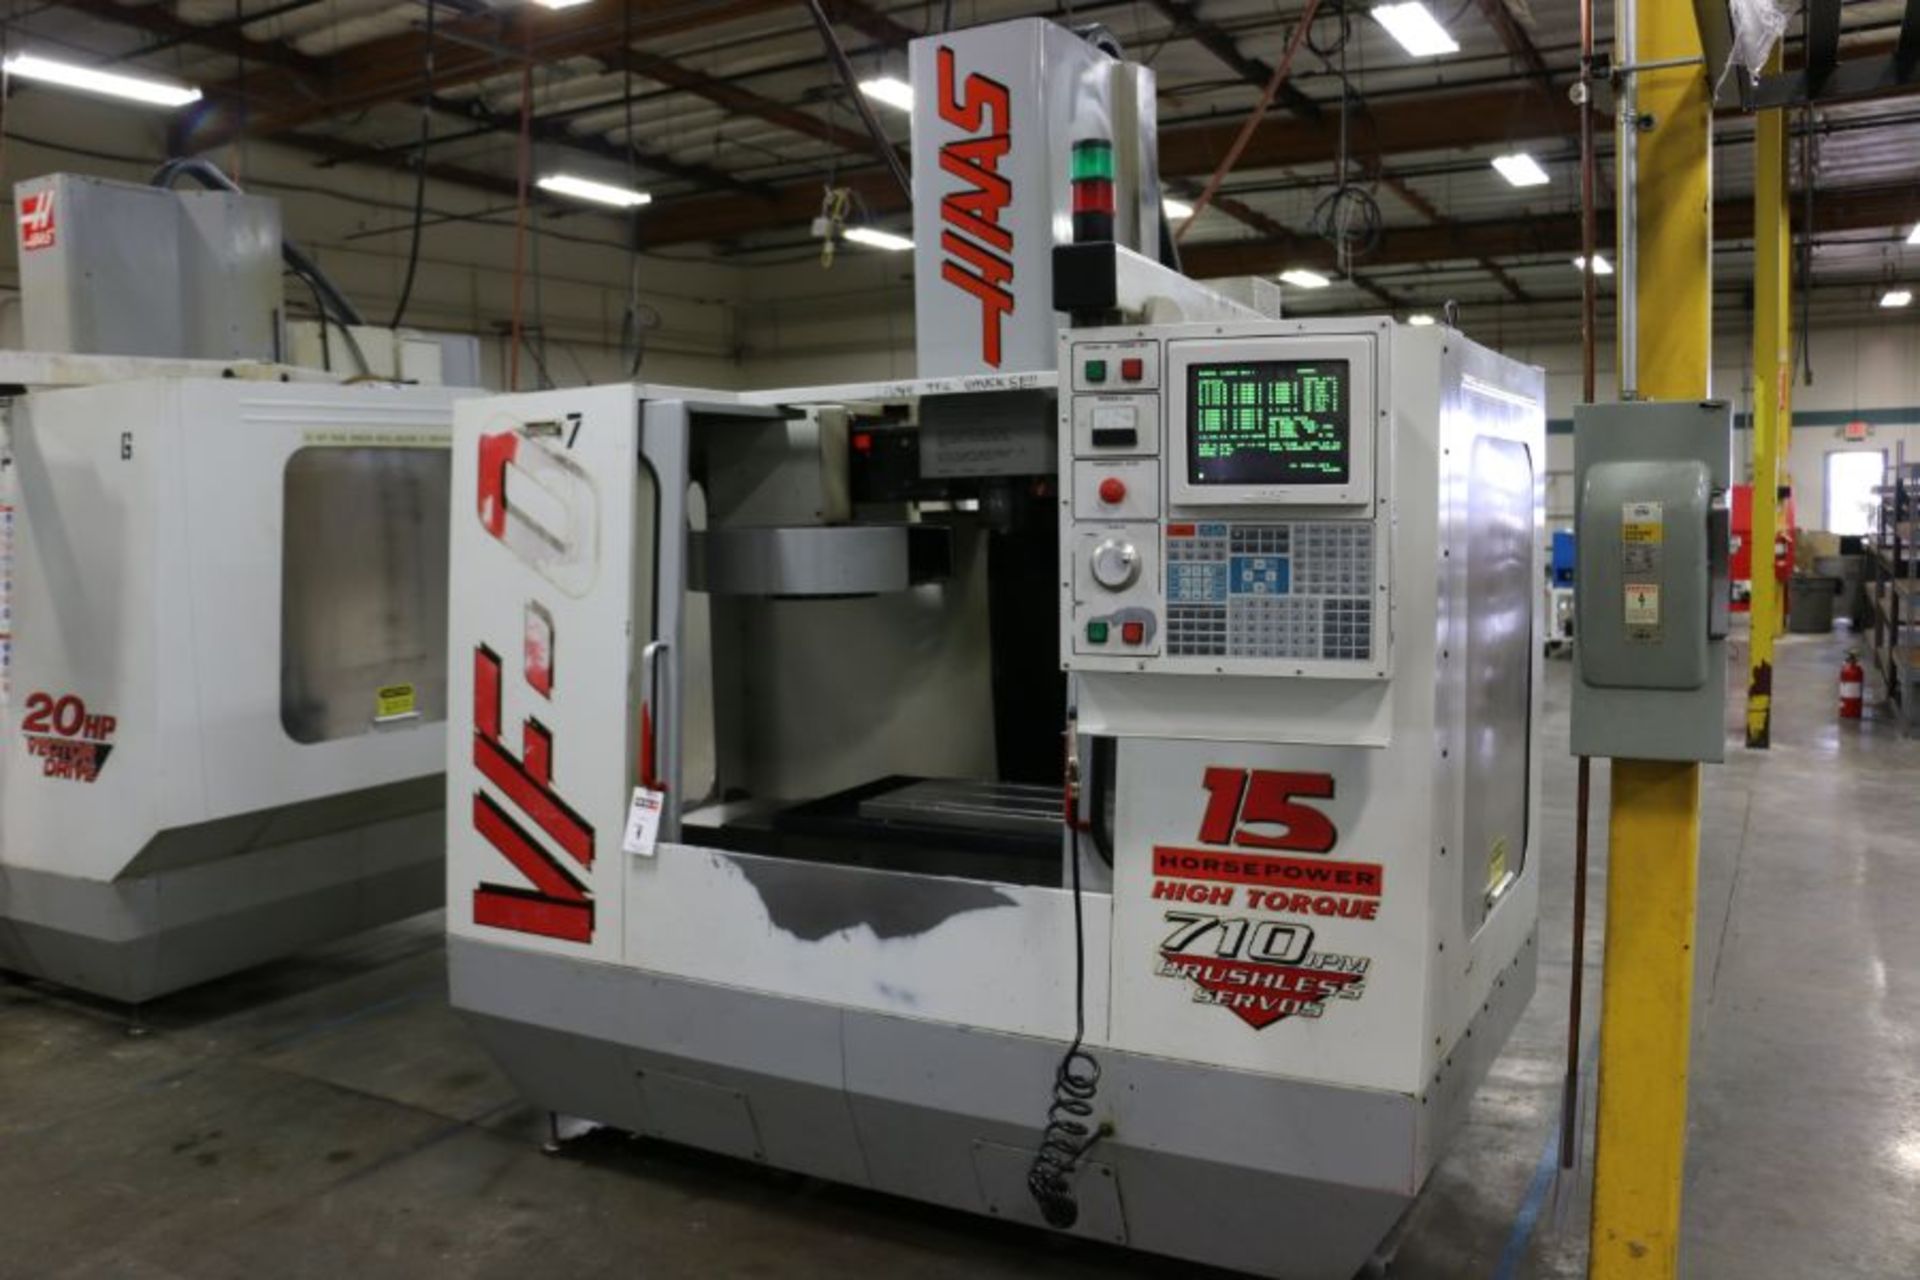 Haas VF-0, 20” x 16” x 20” Travels, 20 Position Tool Carousel, CT-40 Taper, s/n 11736, New 1997 - Image 6 of 12